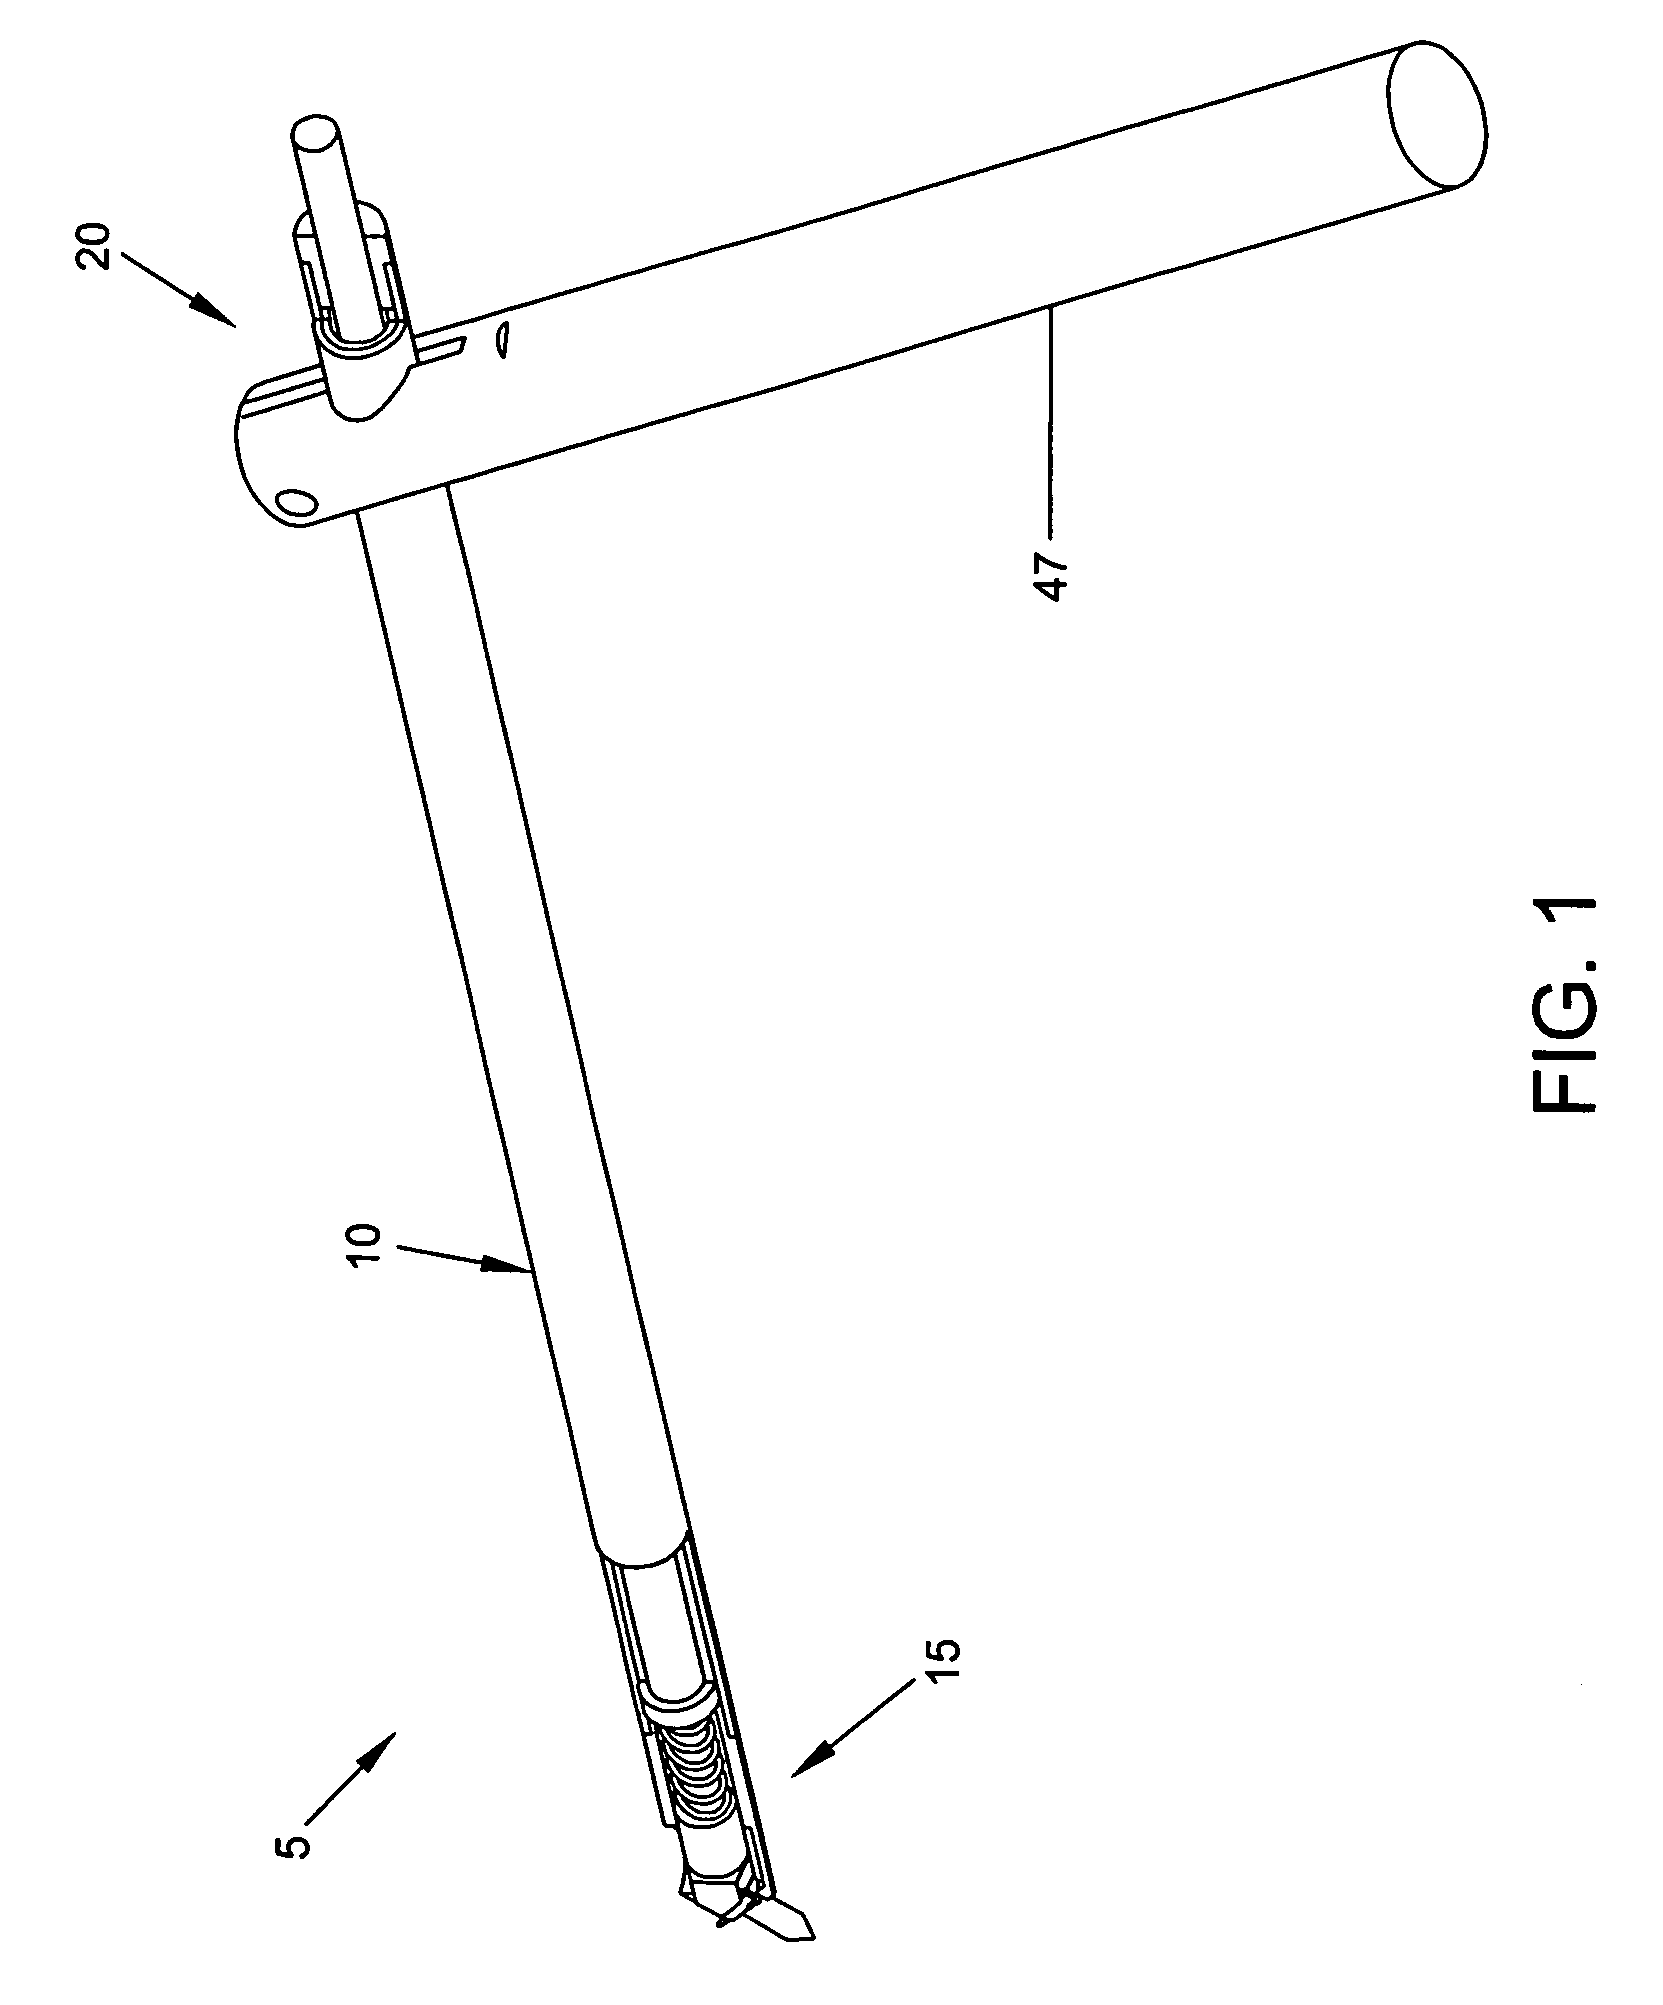 Method and apparatus for performing arthroscopic microfracture surgery